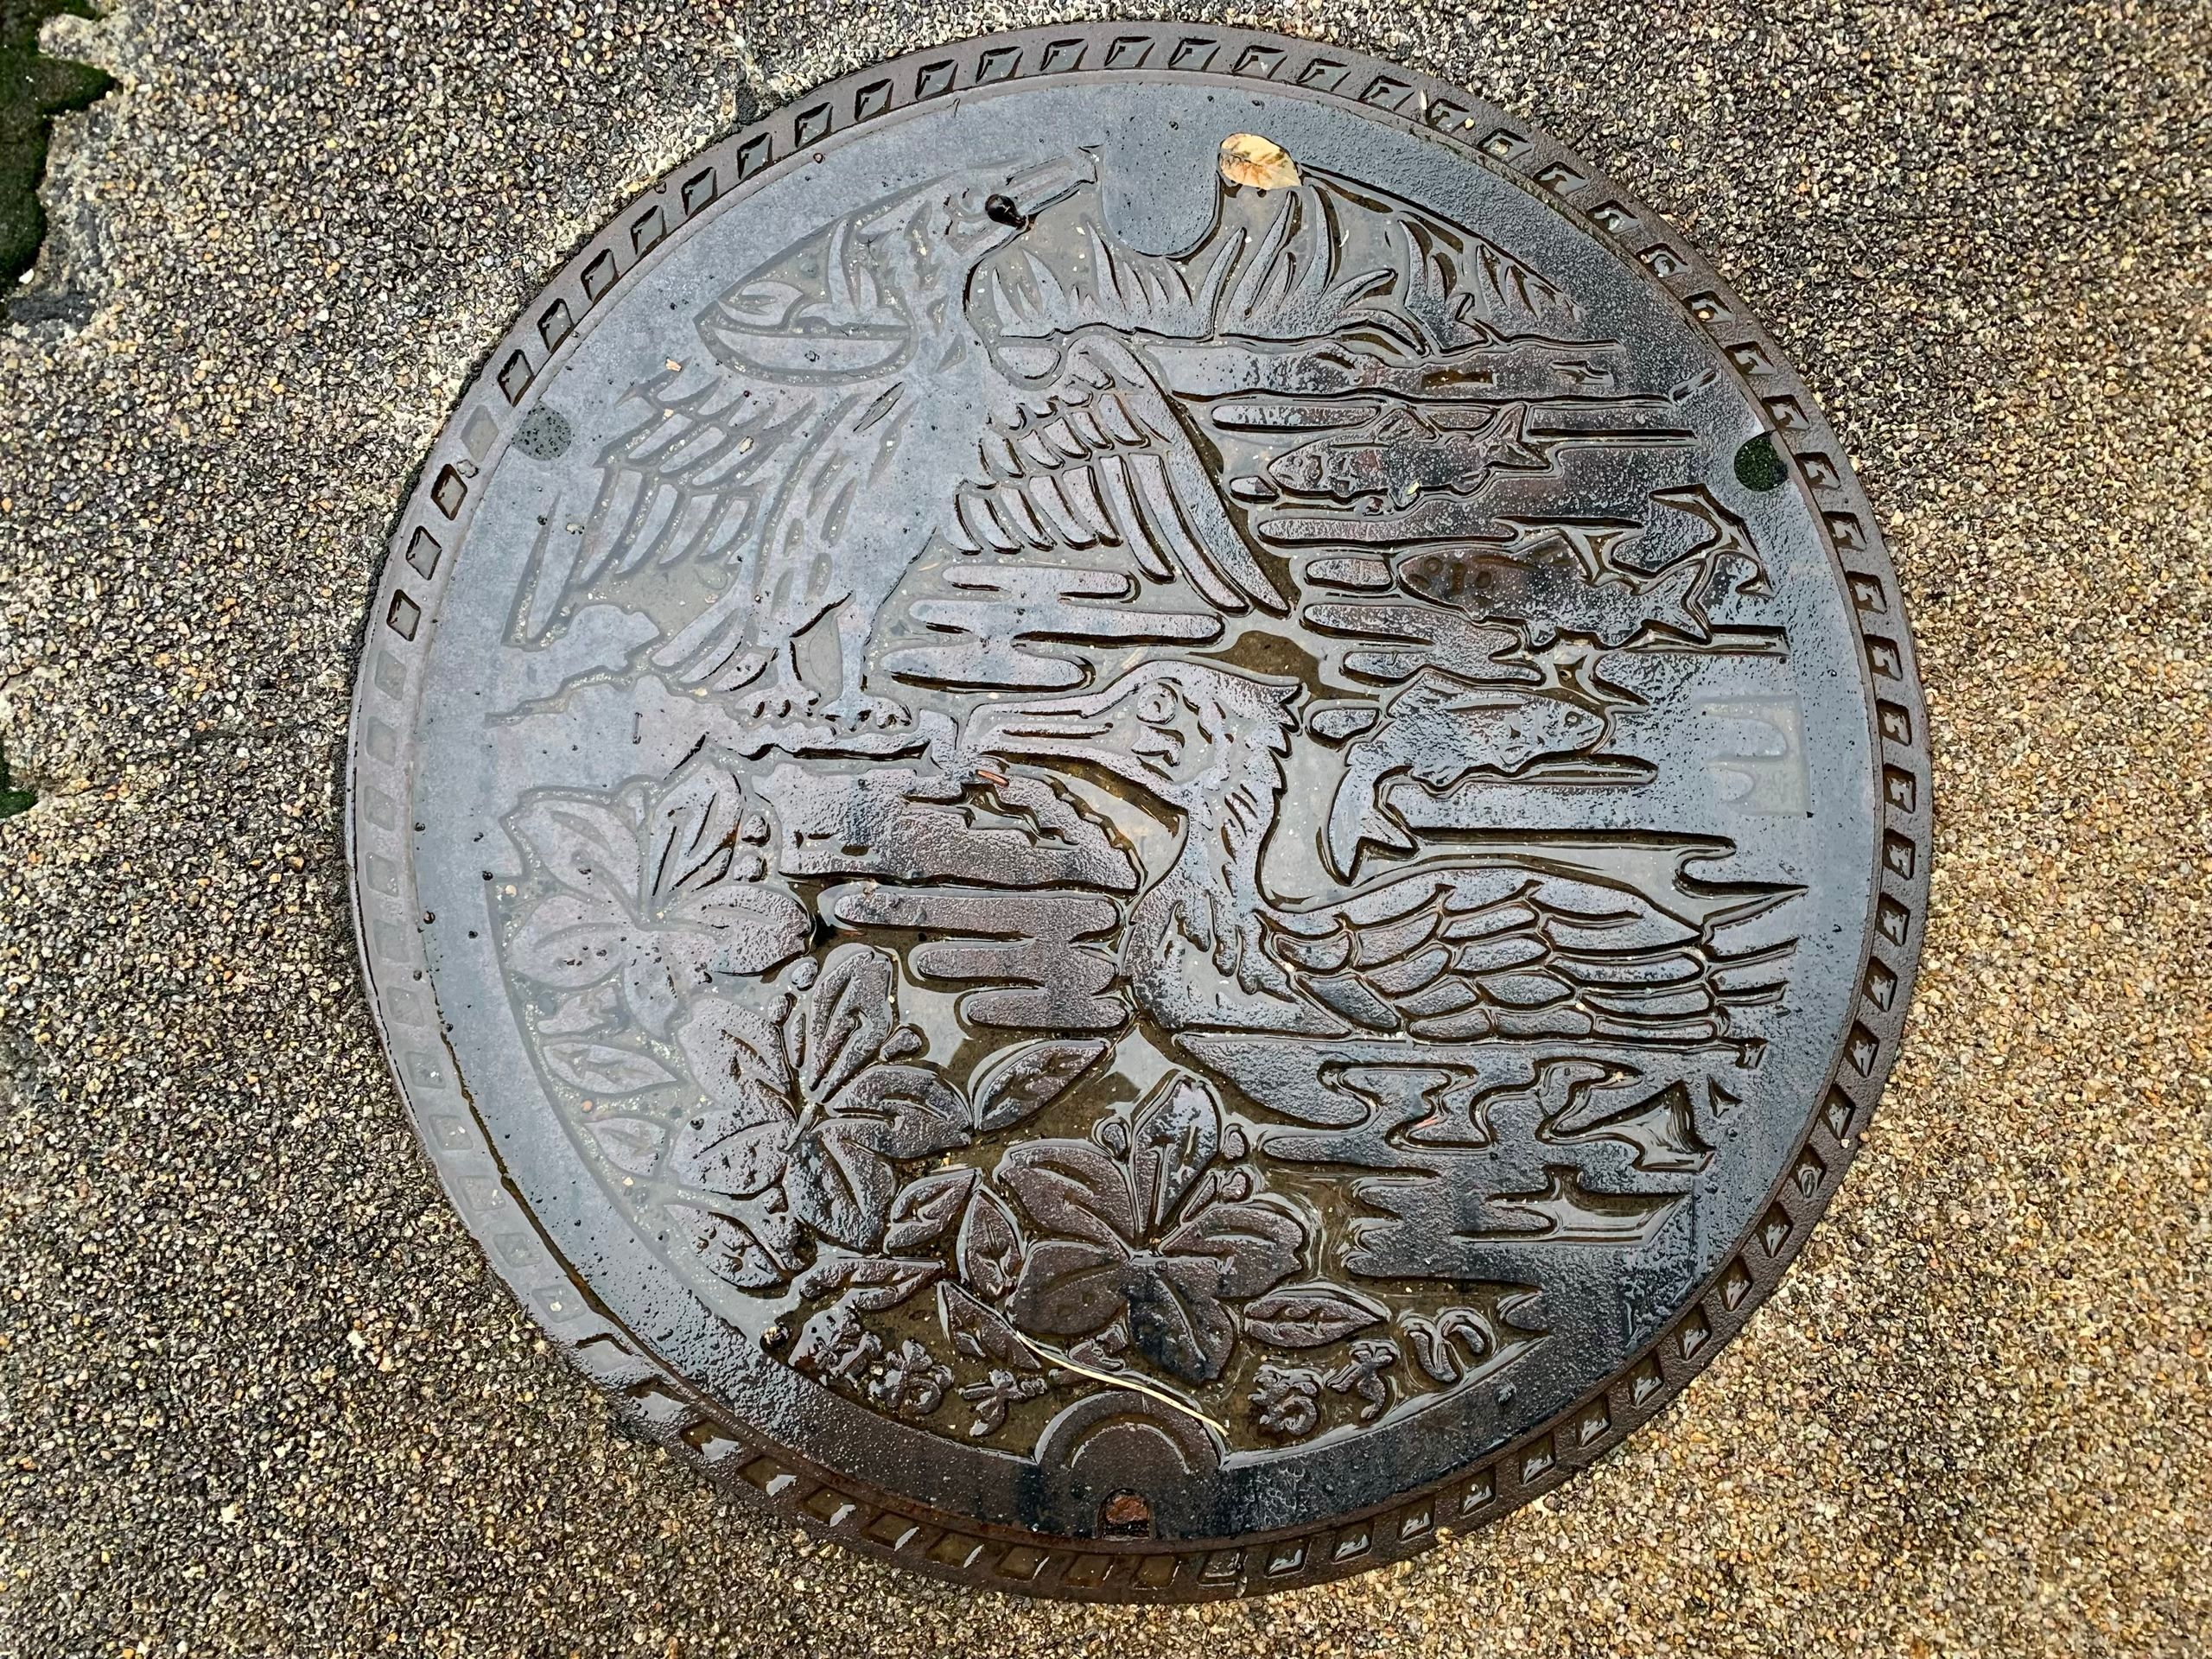 A manhole cover shows two of the fishing cormorants Ōzu is famous for.